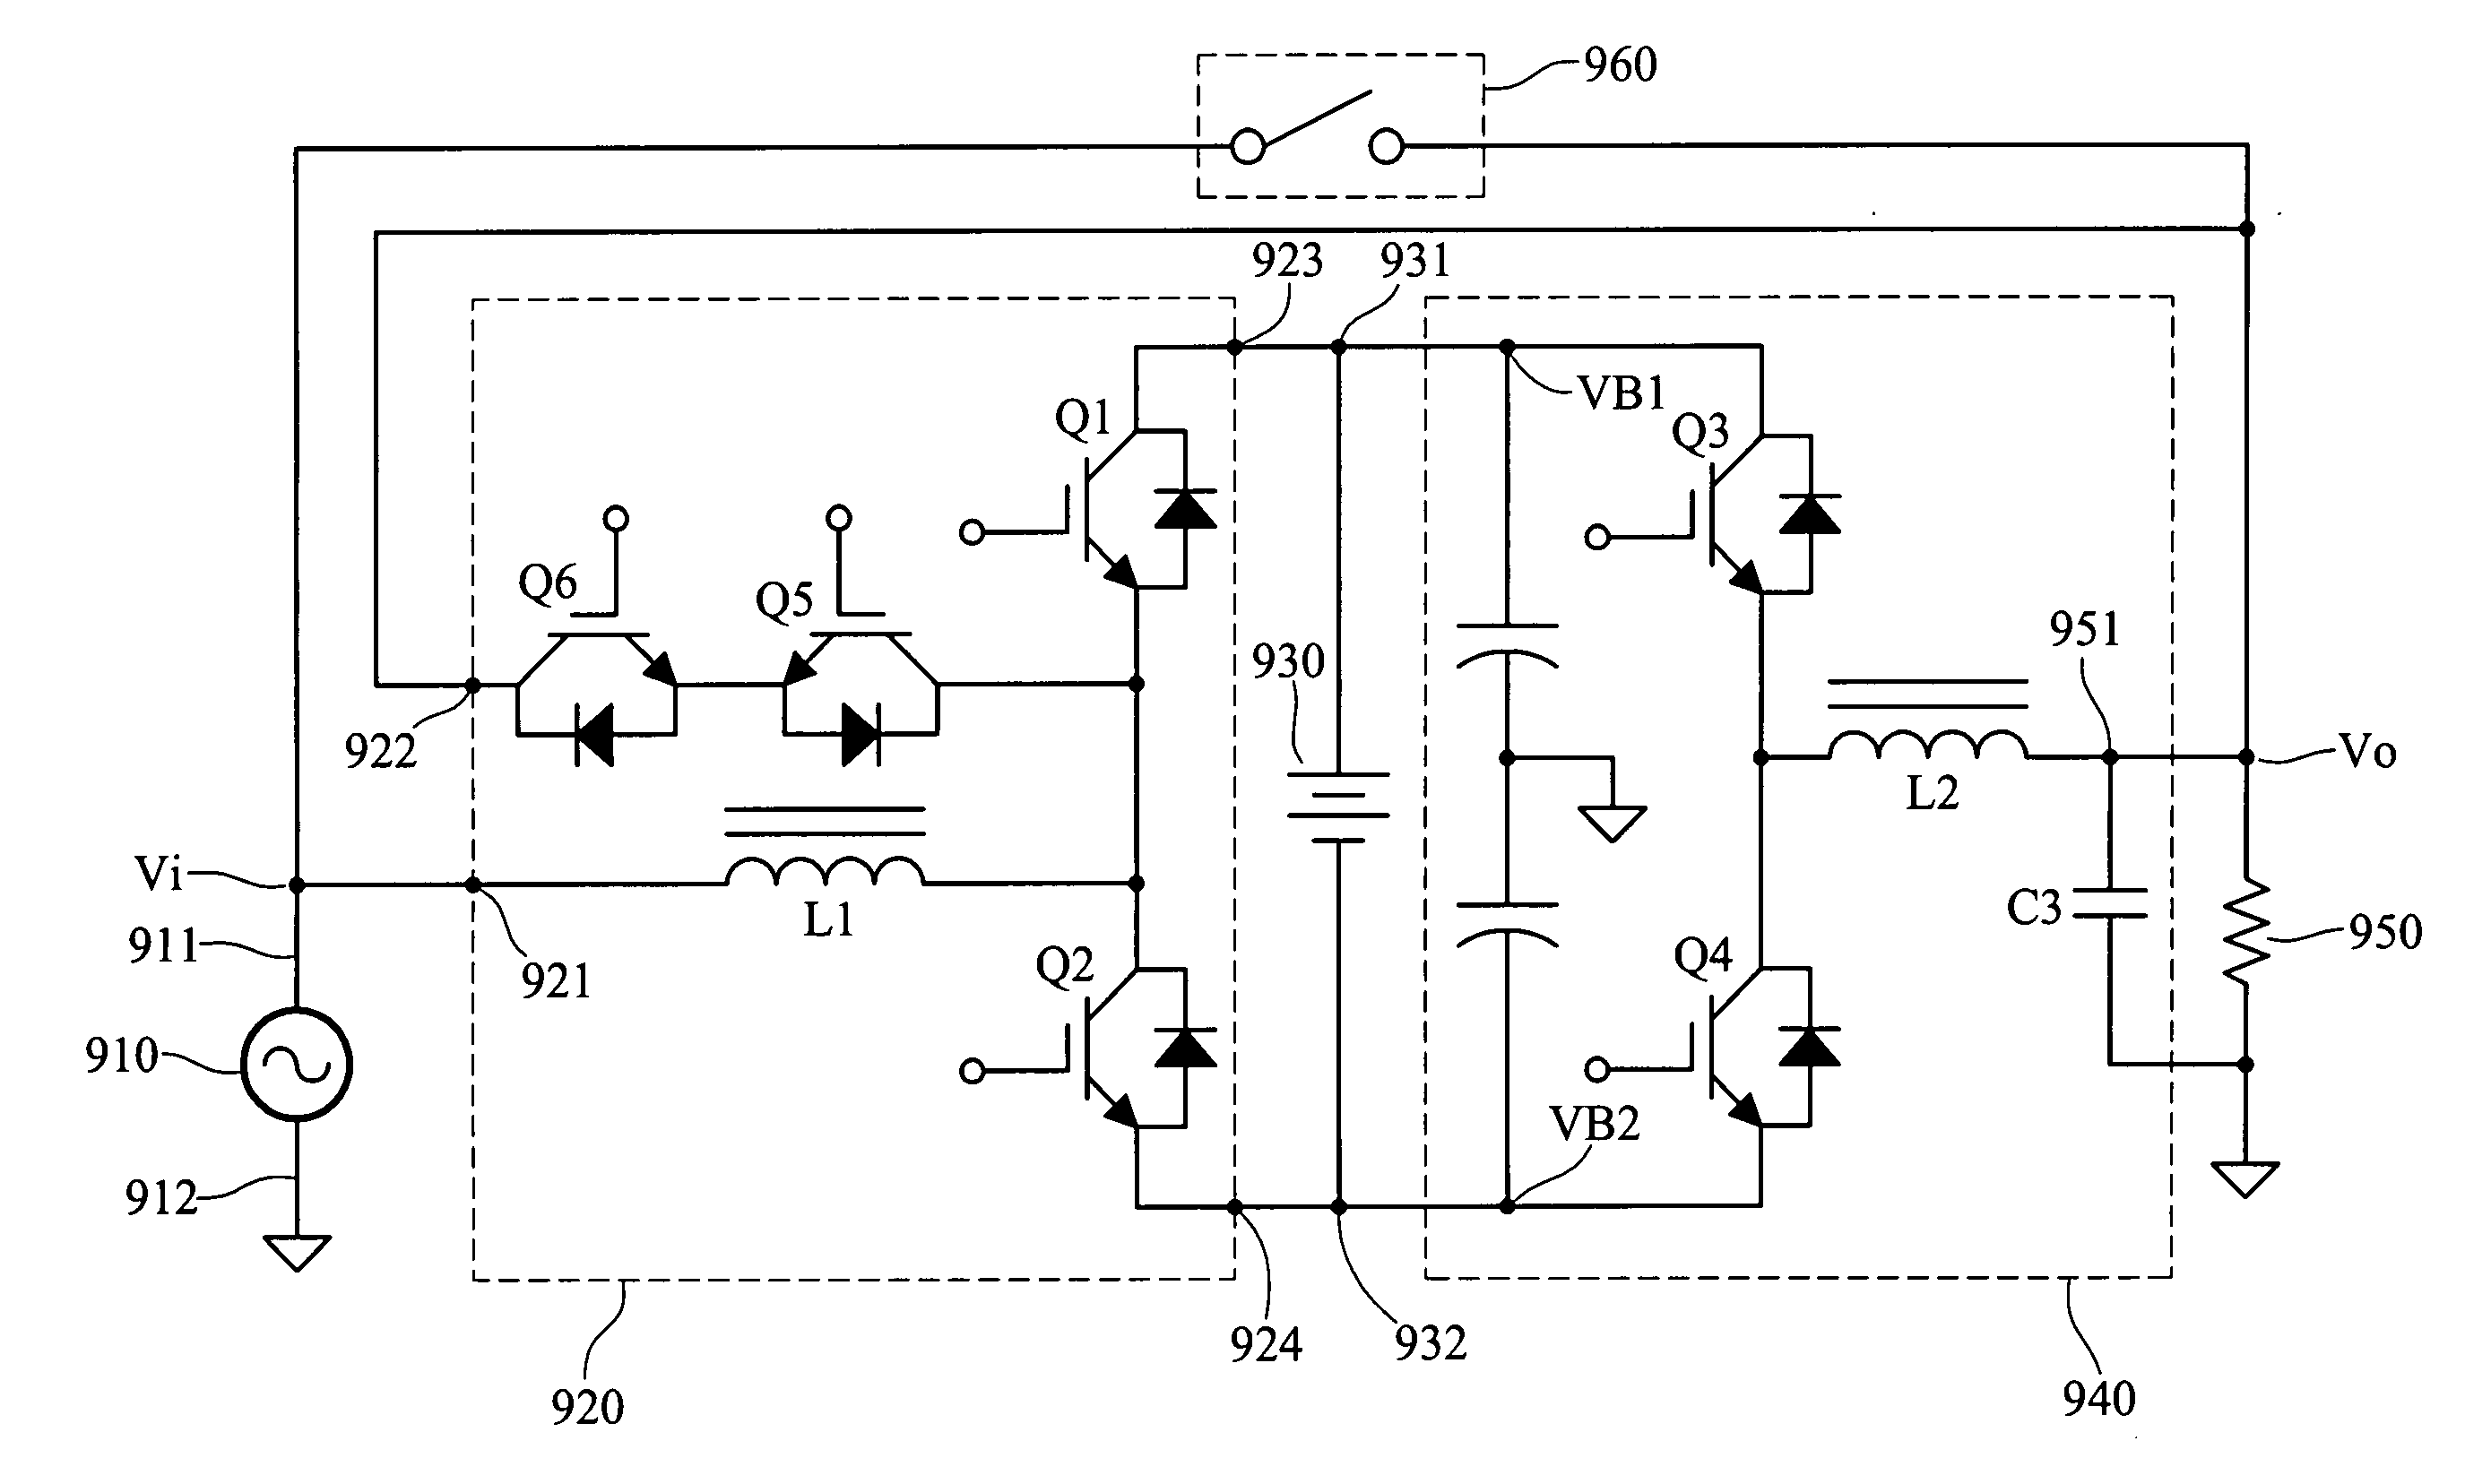 Methods and apparatus providing double conversion/series-parallel hybrid operation in uninterruptible power supplies